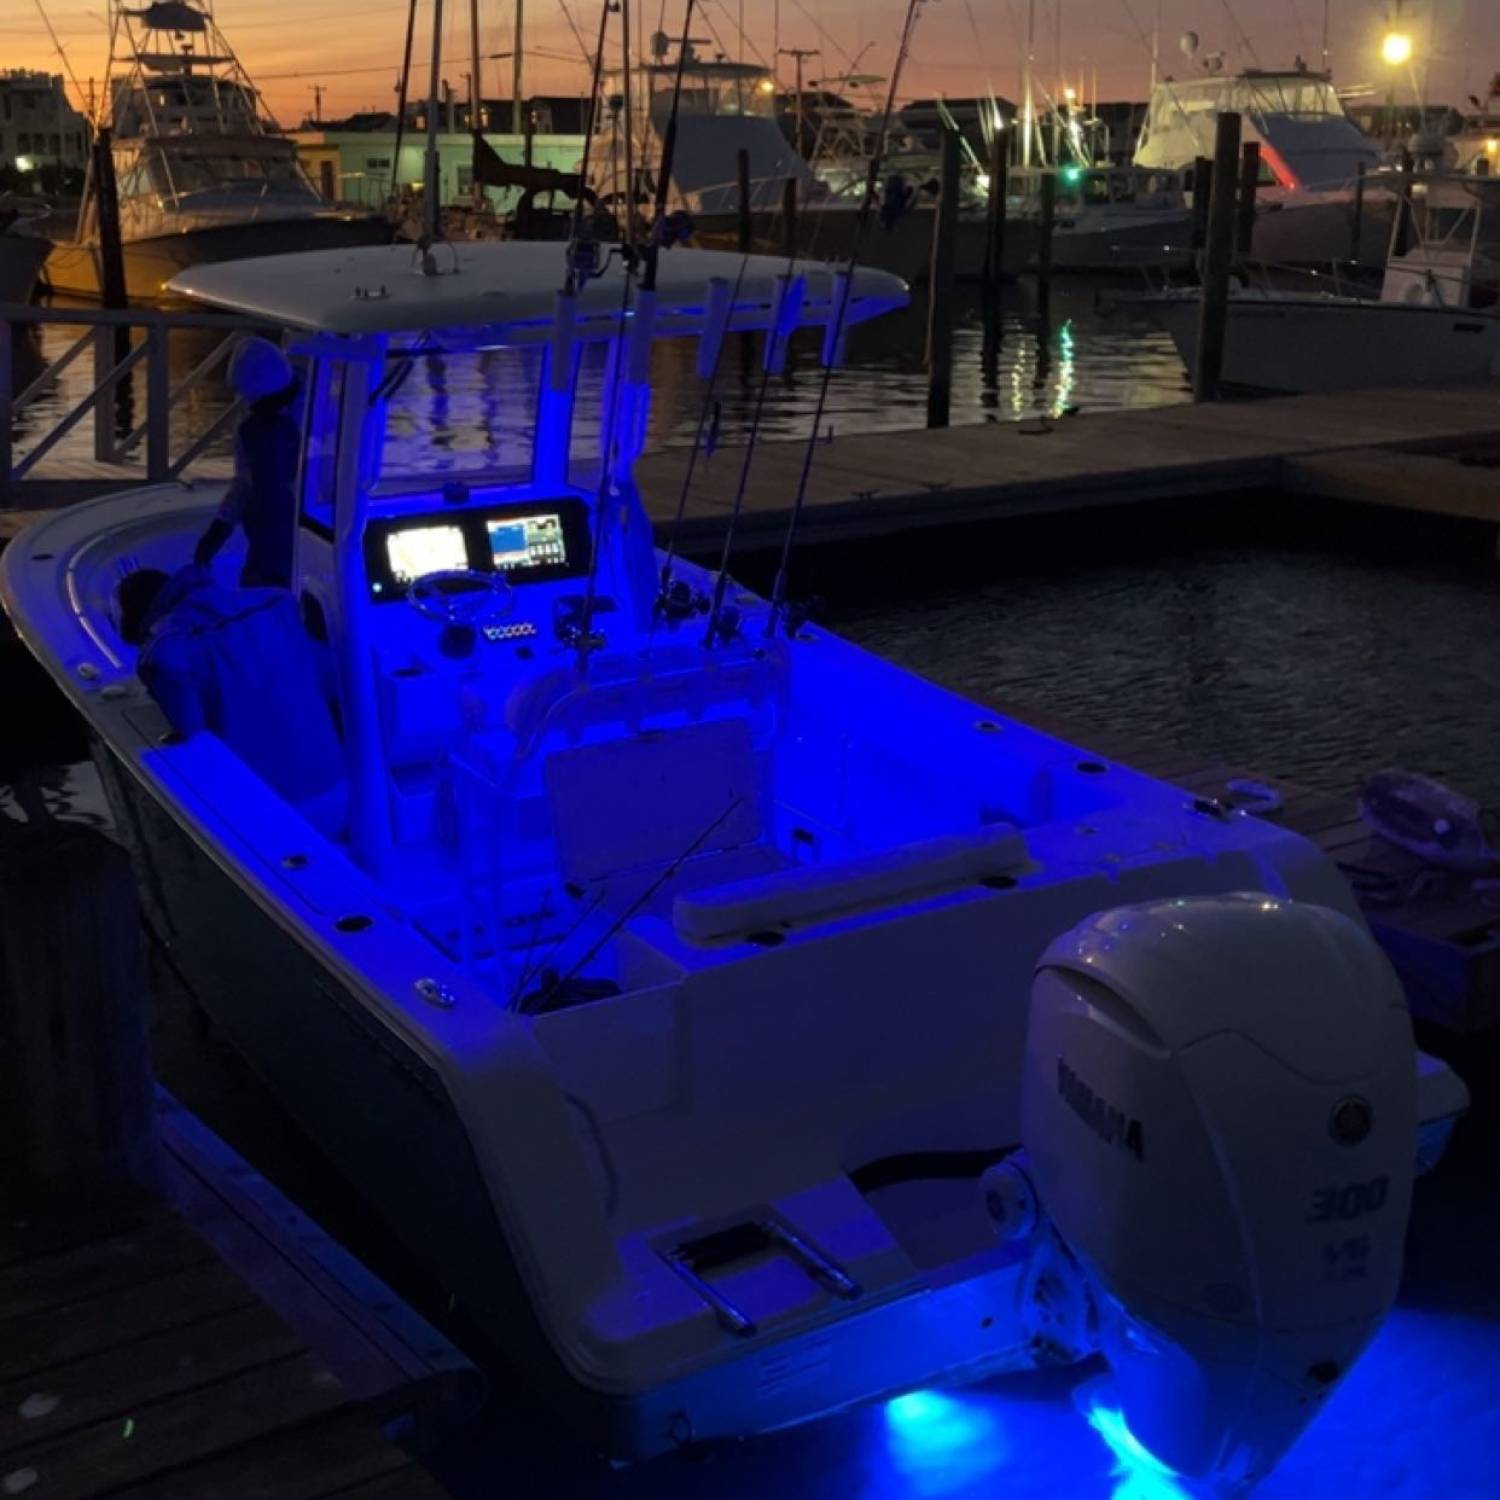 Title: sportsman 232 open - On board their Sportsman Open 232 Center Console - Location: barnegat light. Participating in the Photo Contest #SportsmanDecember2023